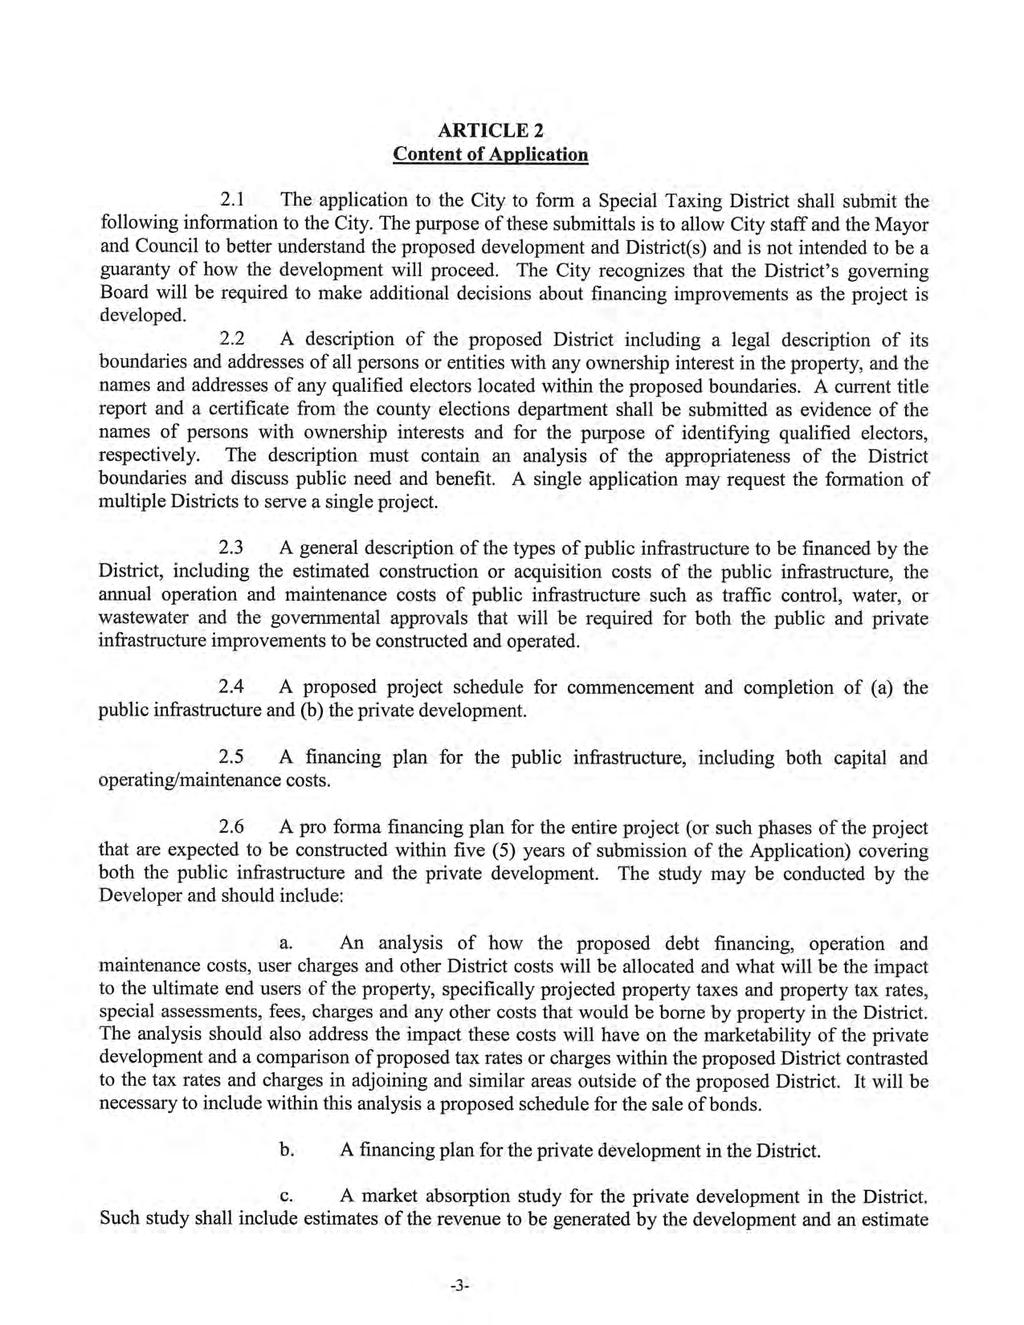 ARTICLE 2 Content of Application 2.1 The application to the City to form a Special Taxing District shall submit the following information to the City.